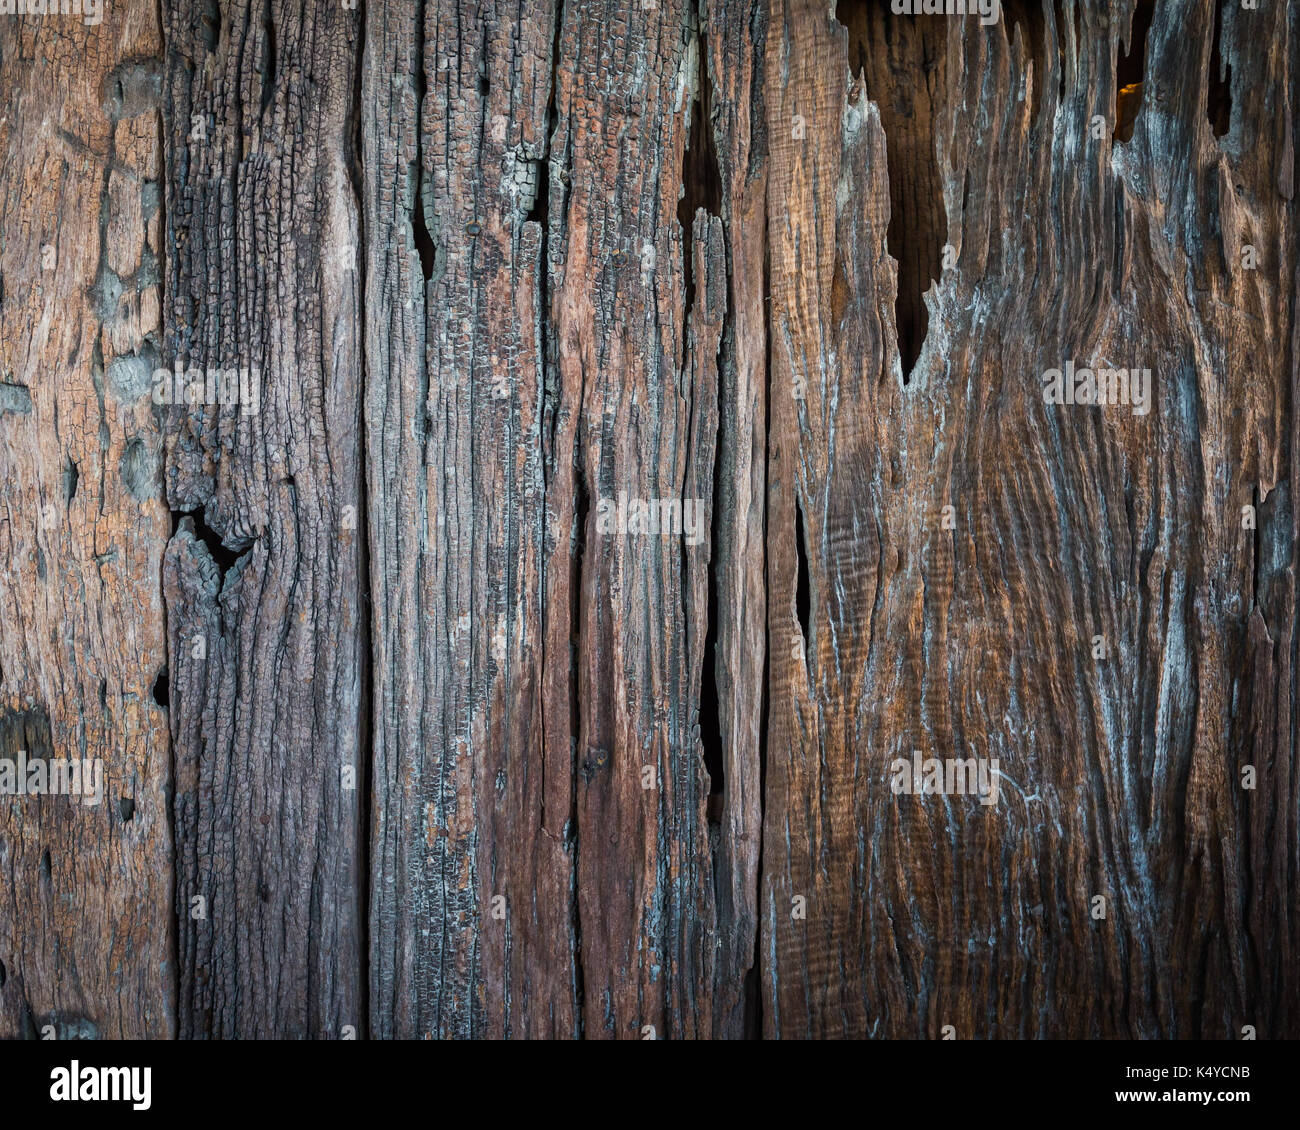 Old wood texture, Texture of bark wood use as natural background, Abstract background. Stock Photo